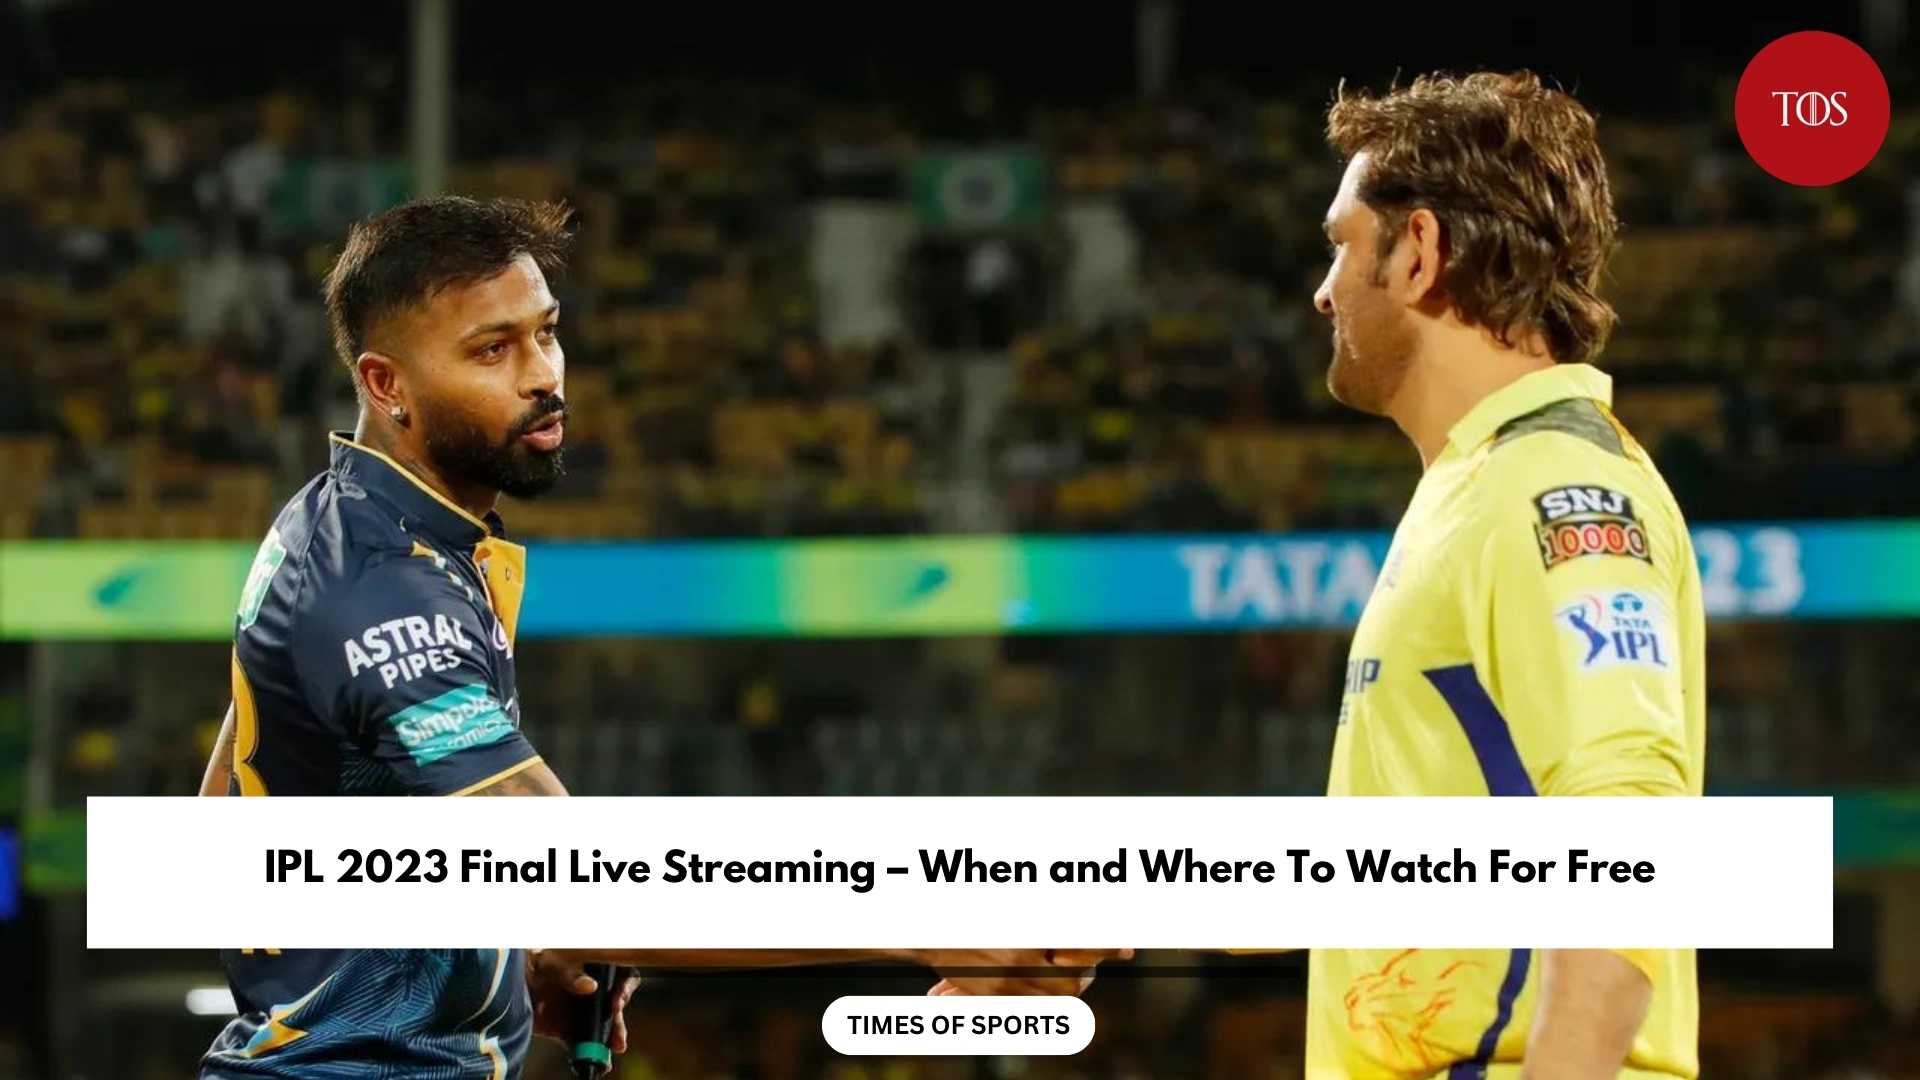 IPL 2023 Final Live Streaming When & Where To Watch Free?